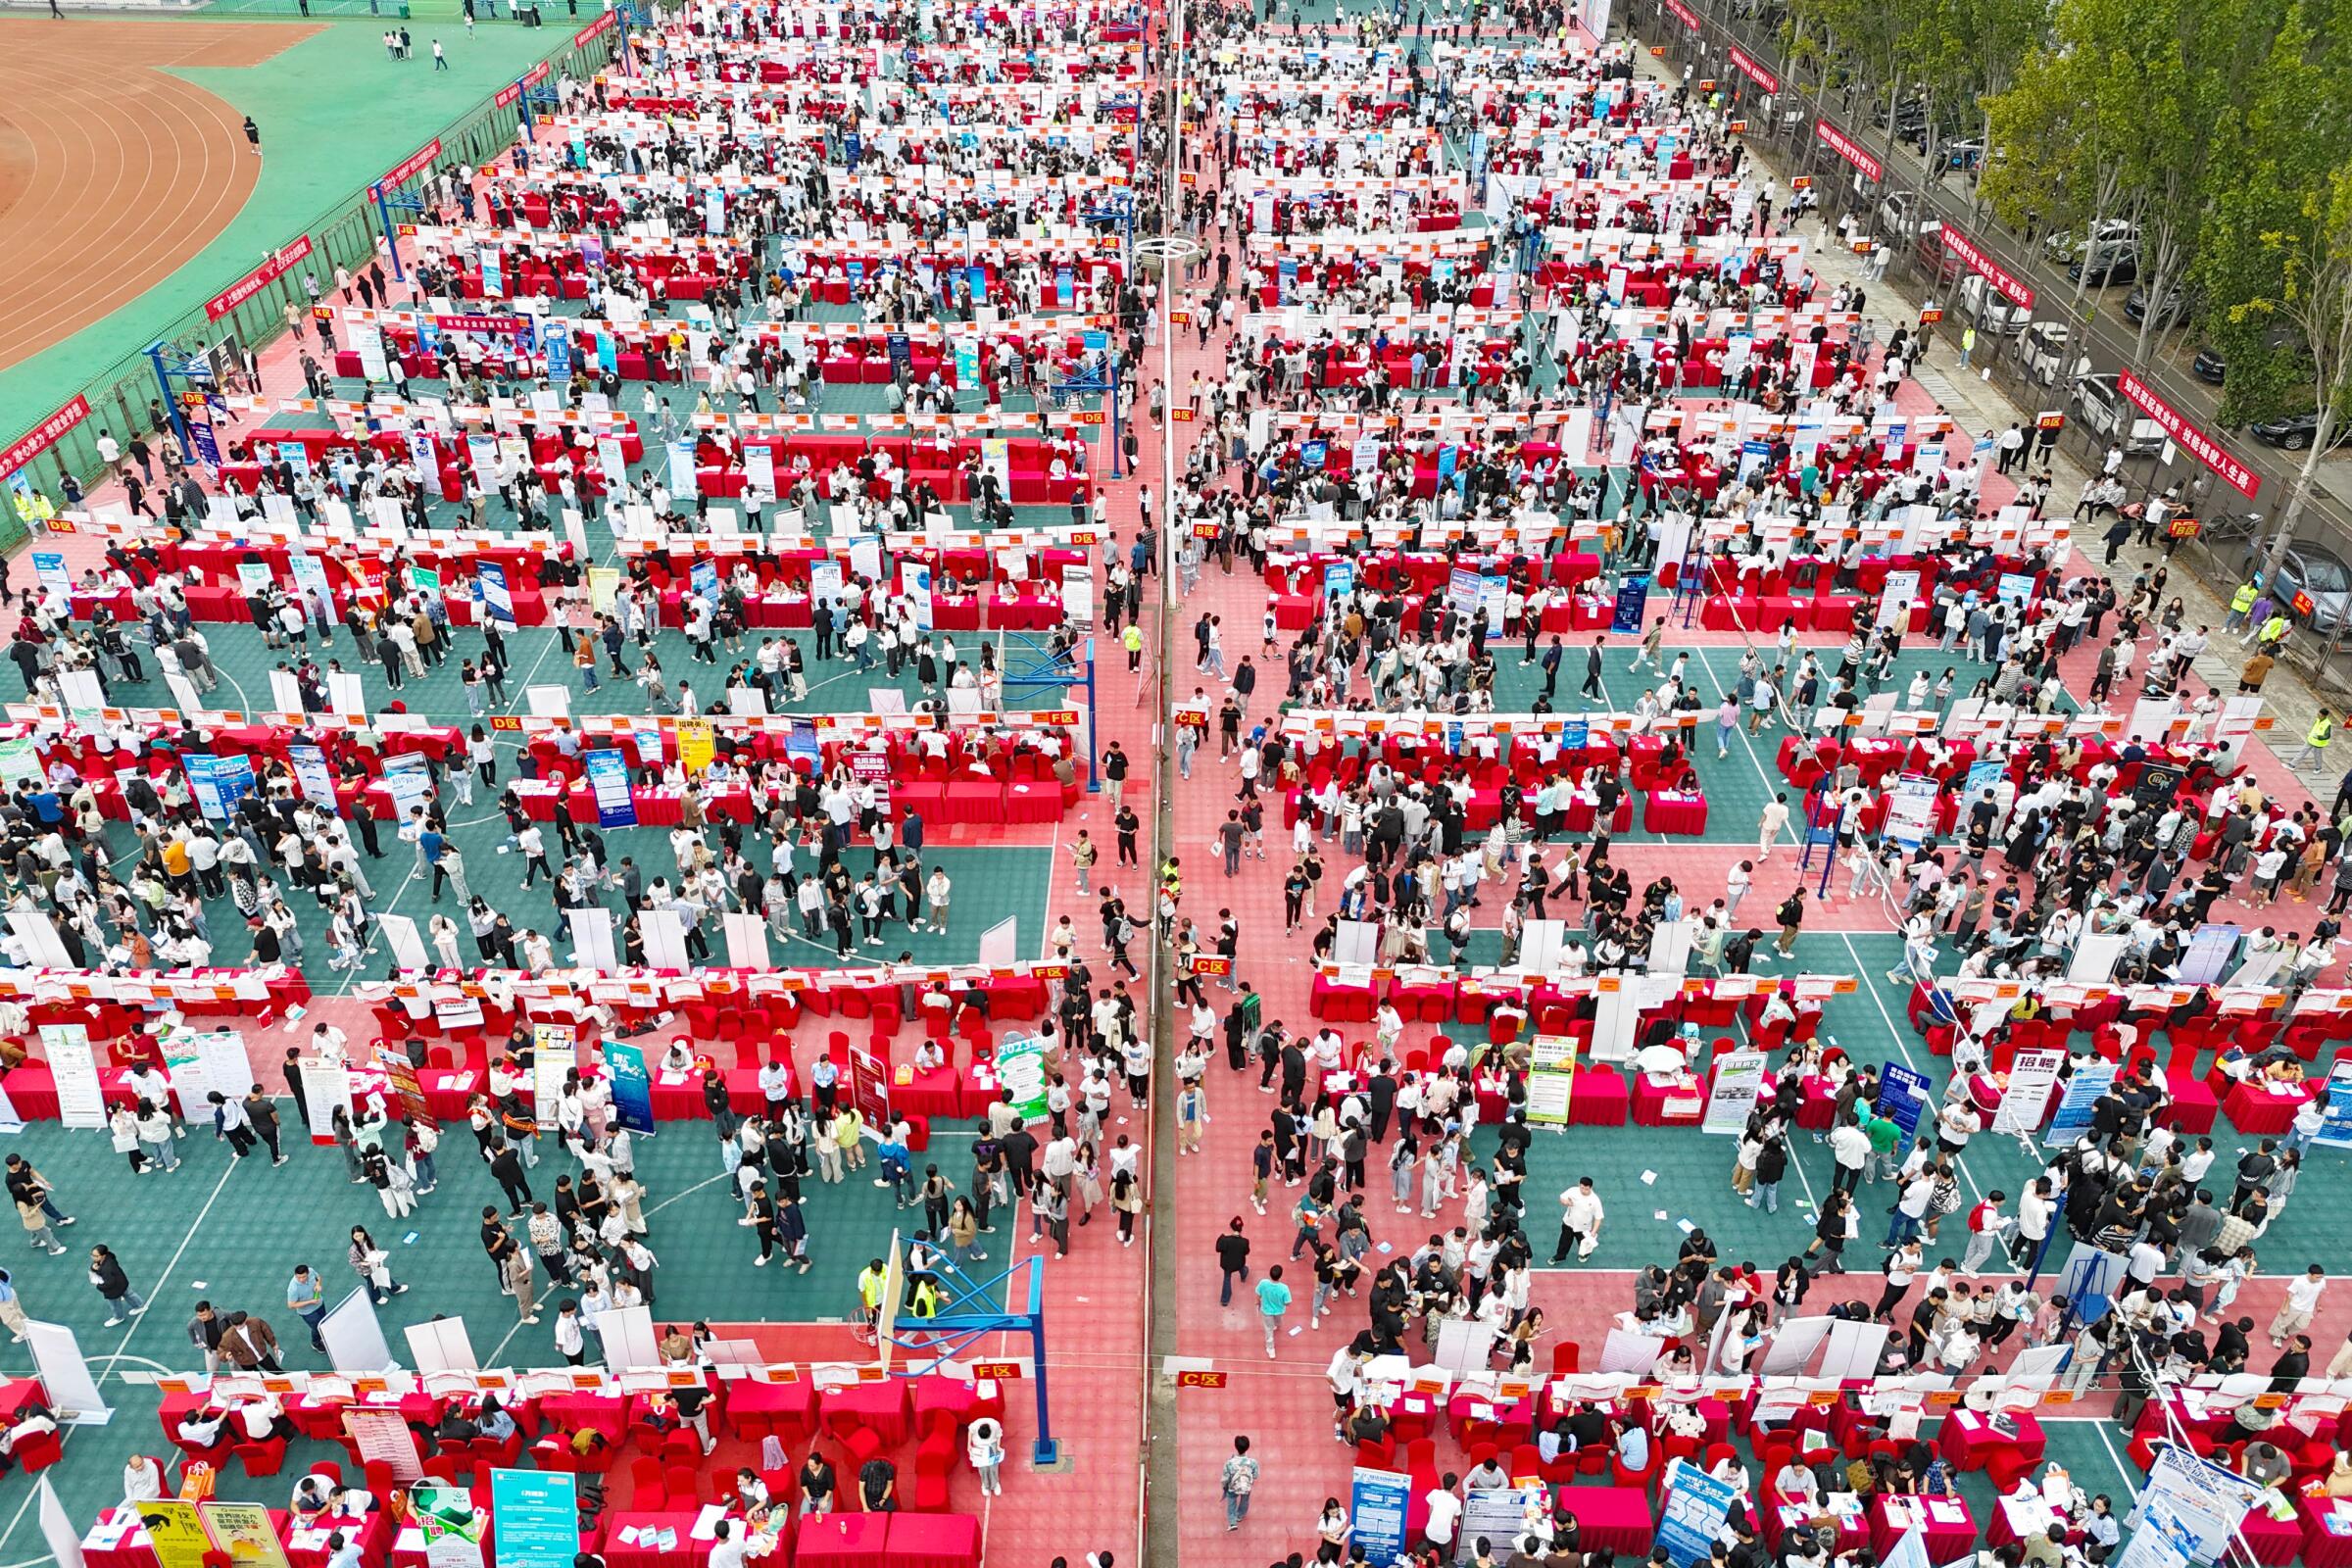 College students go to booths at a job fair at Shandong University of Science and Technology in Qingdao, China.